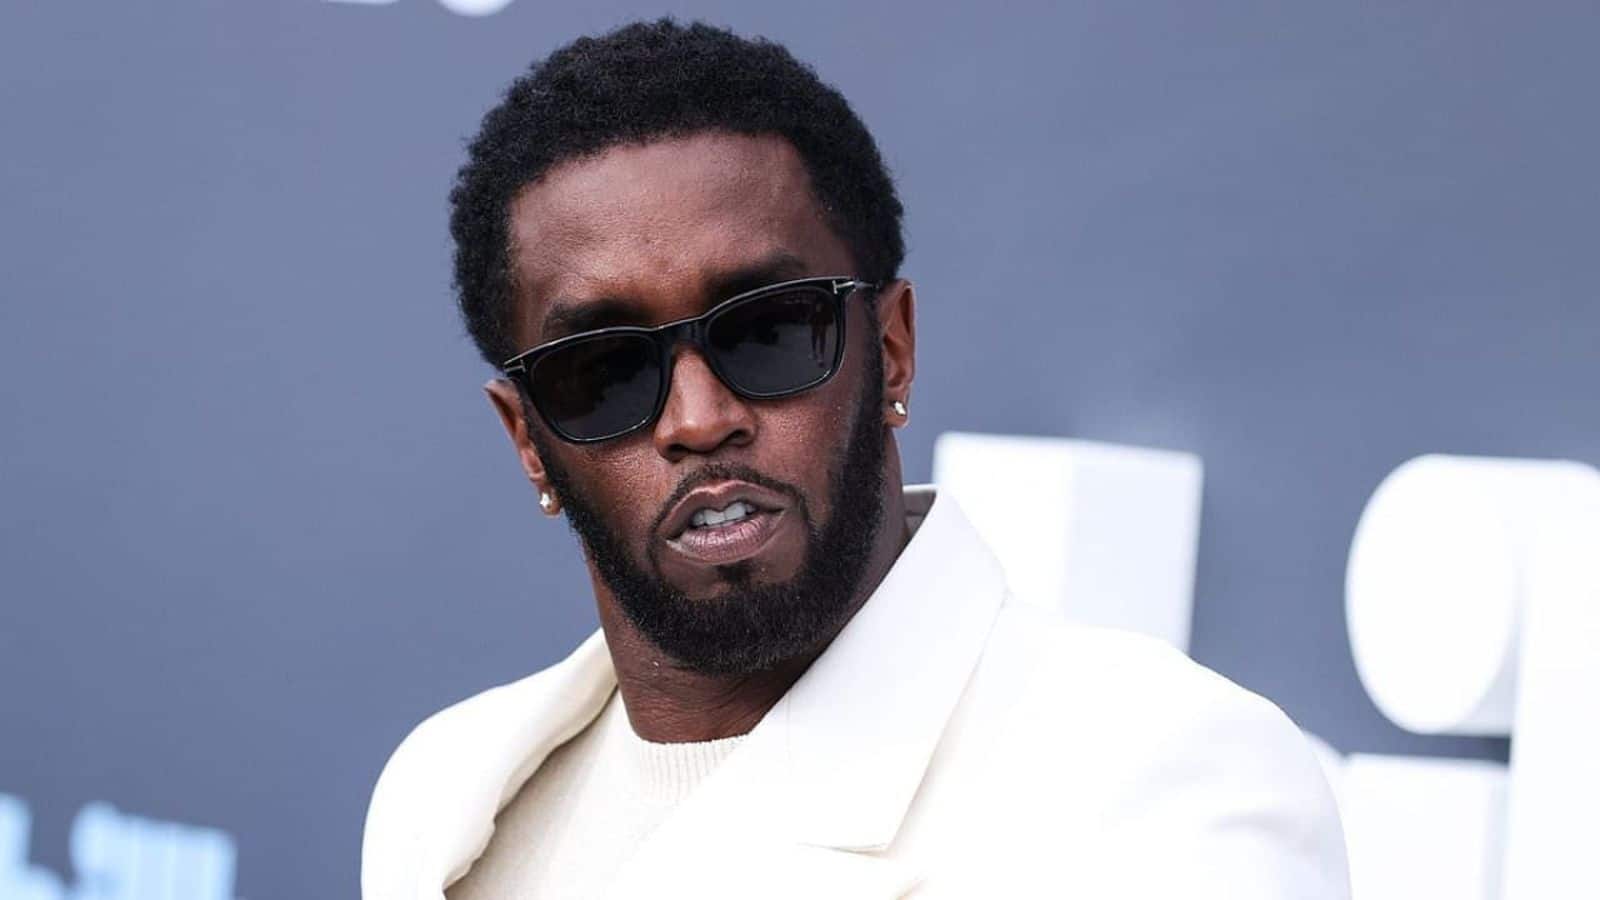 All called-off deals, company break-ups amid Diddy's sexual assault allegations